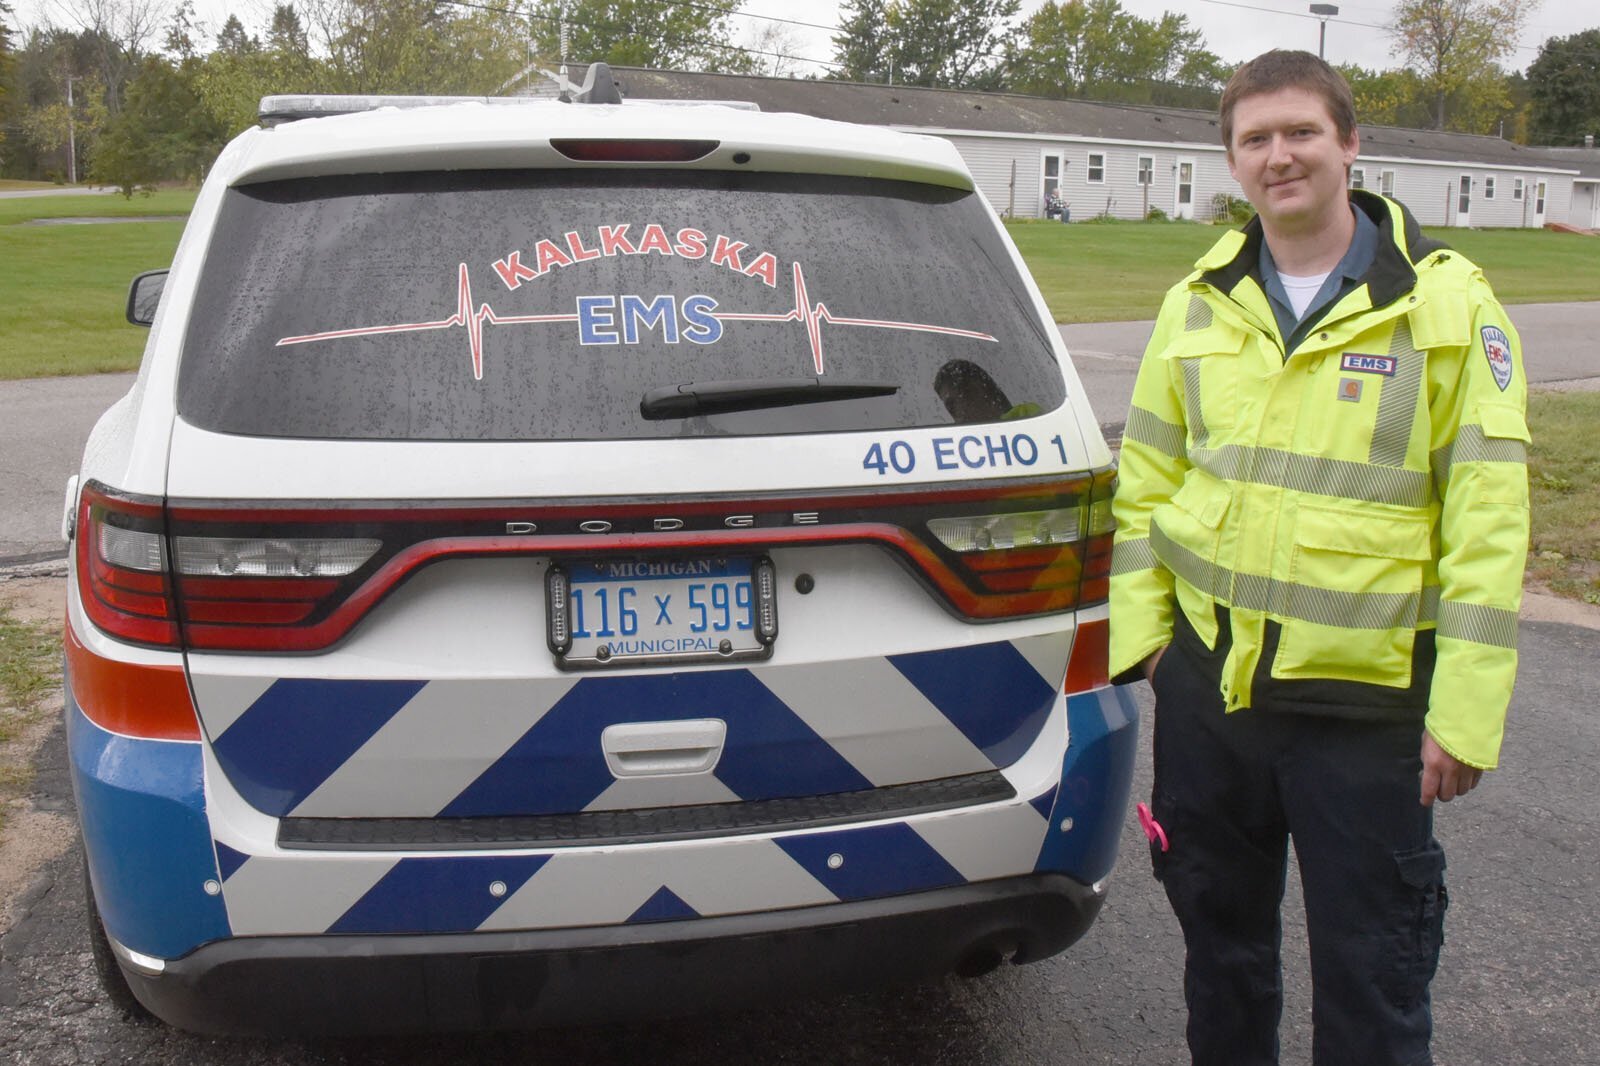 Mike Berendsohn, EMS director at Kalkaska Memorial Health Center, with a smaller vehicle often used for community paramedicine work. 